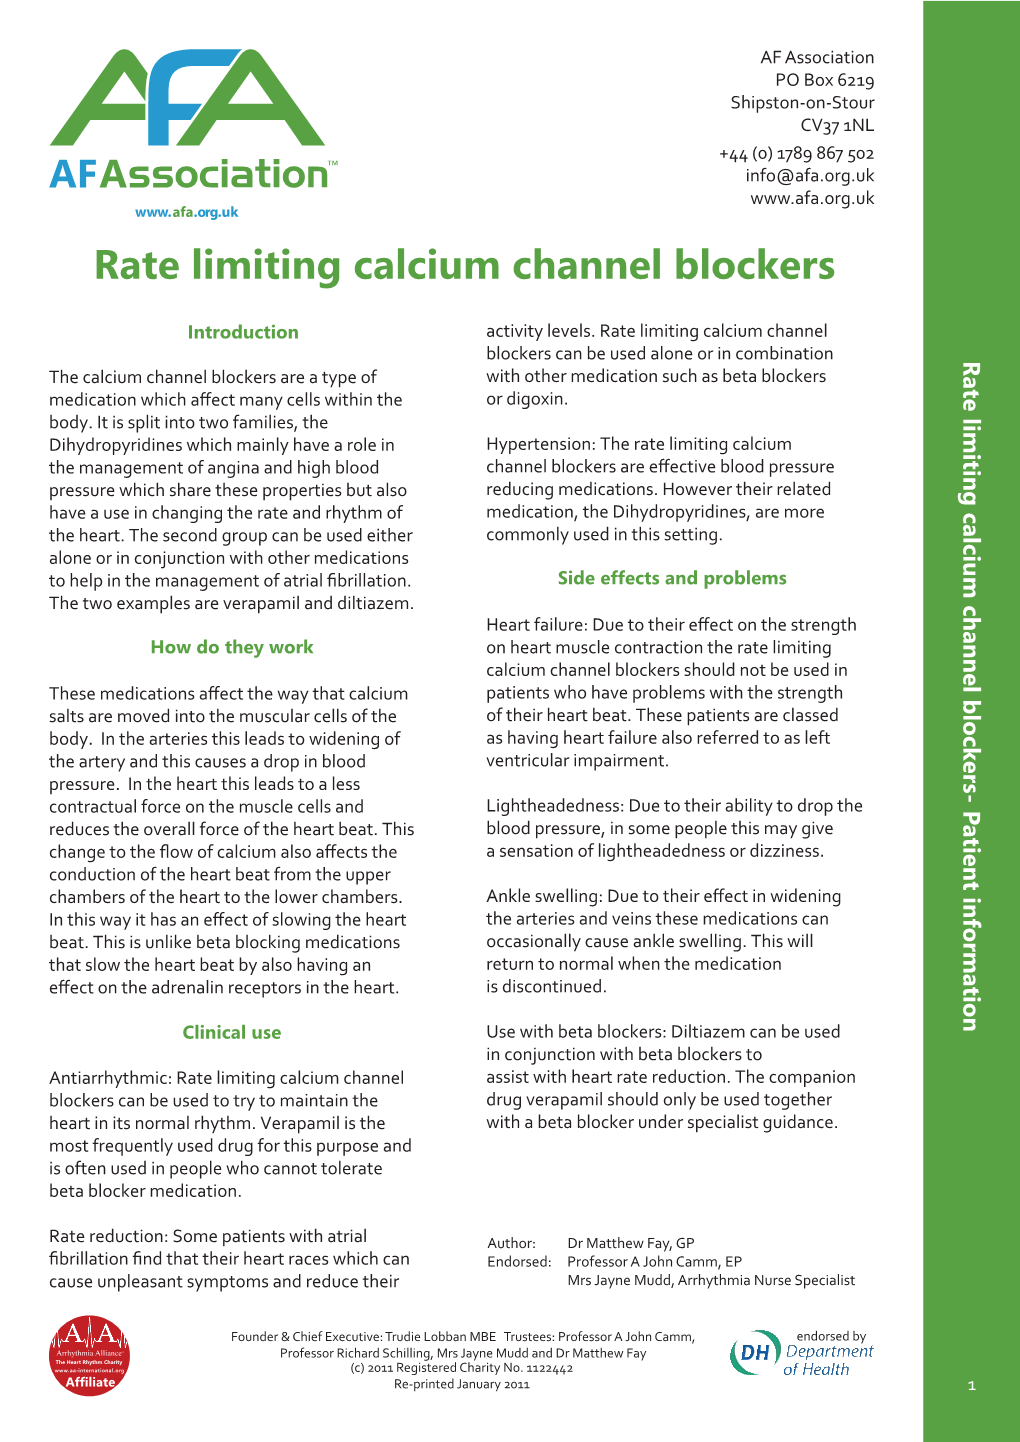 Rate Limiting Calcium Channel Blockers (160203)